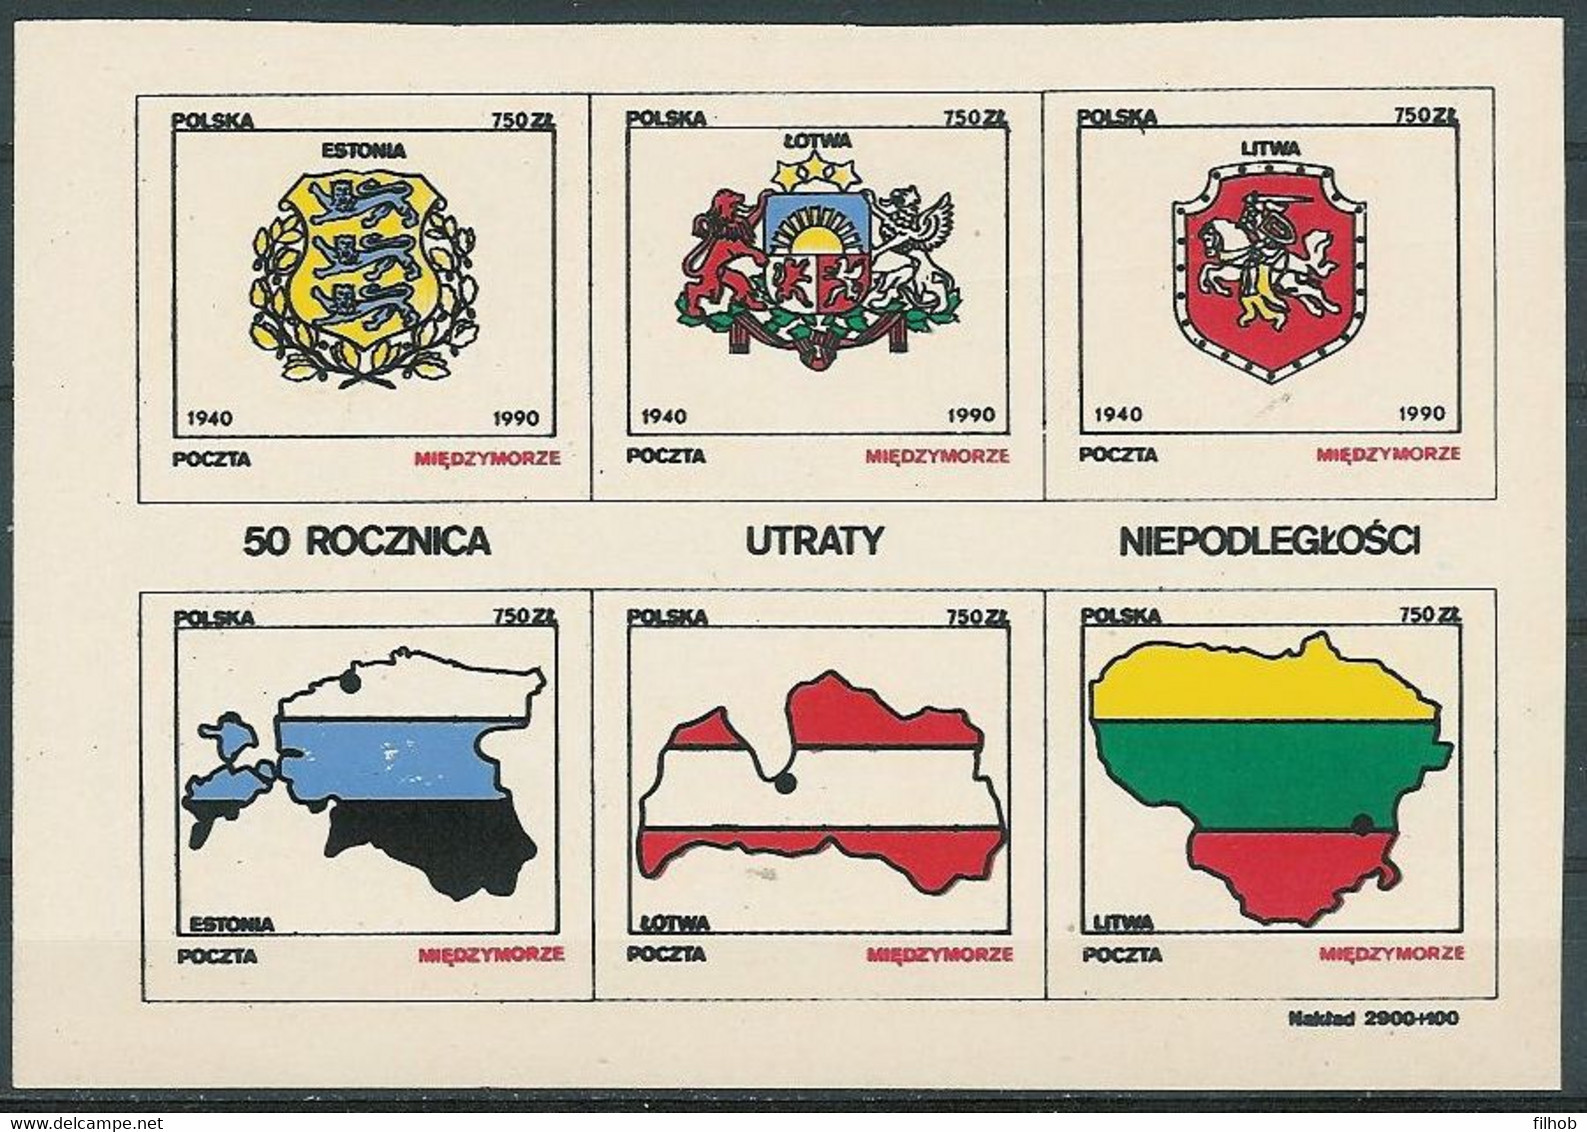 Poland SOLIDARITY (S316): Post Miedzymorze 50th Ann. Loss Of Independence Crest Map (block) - Viñetas Solidarnosc